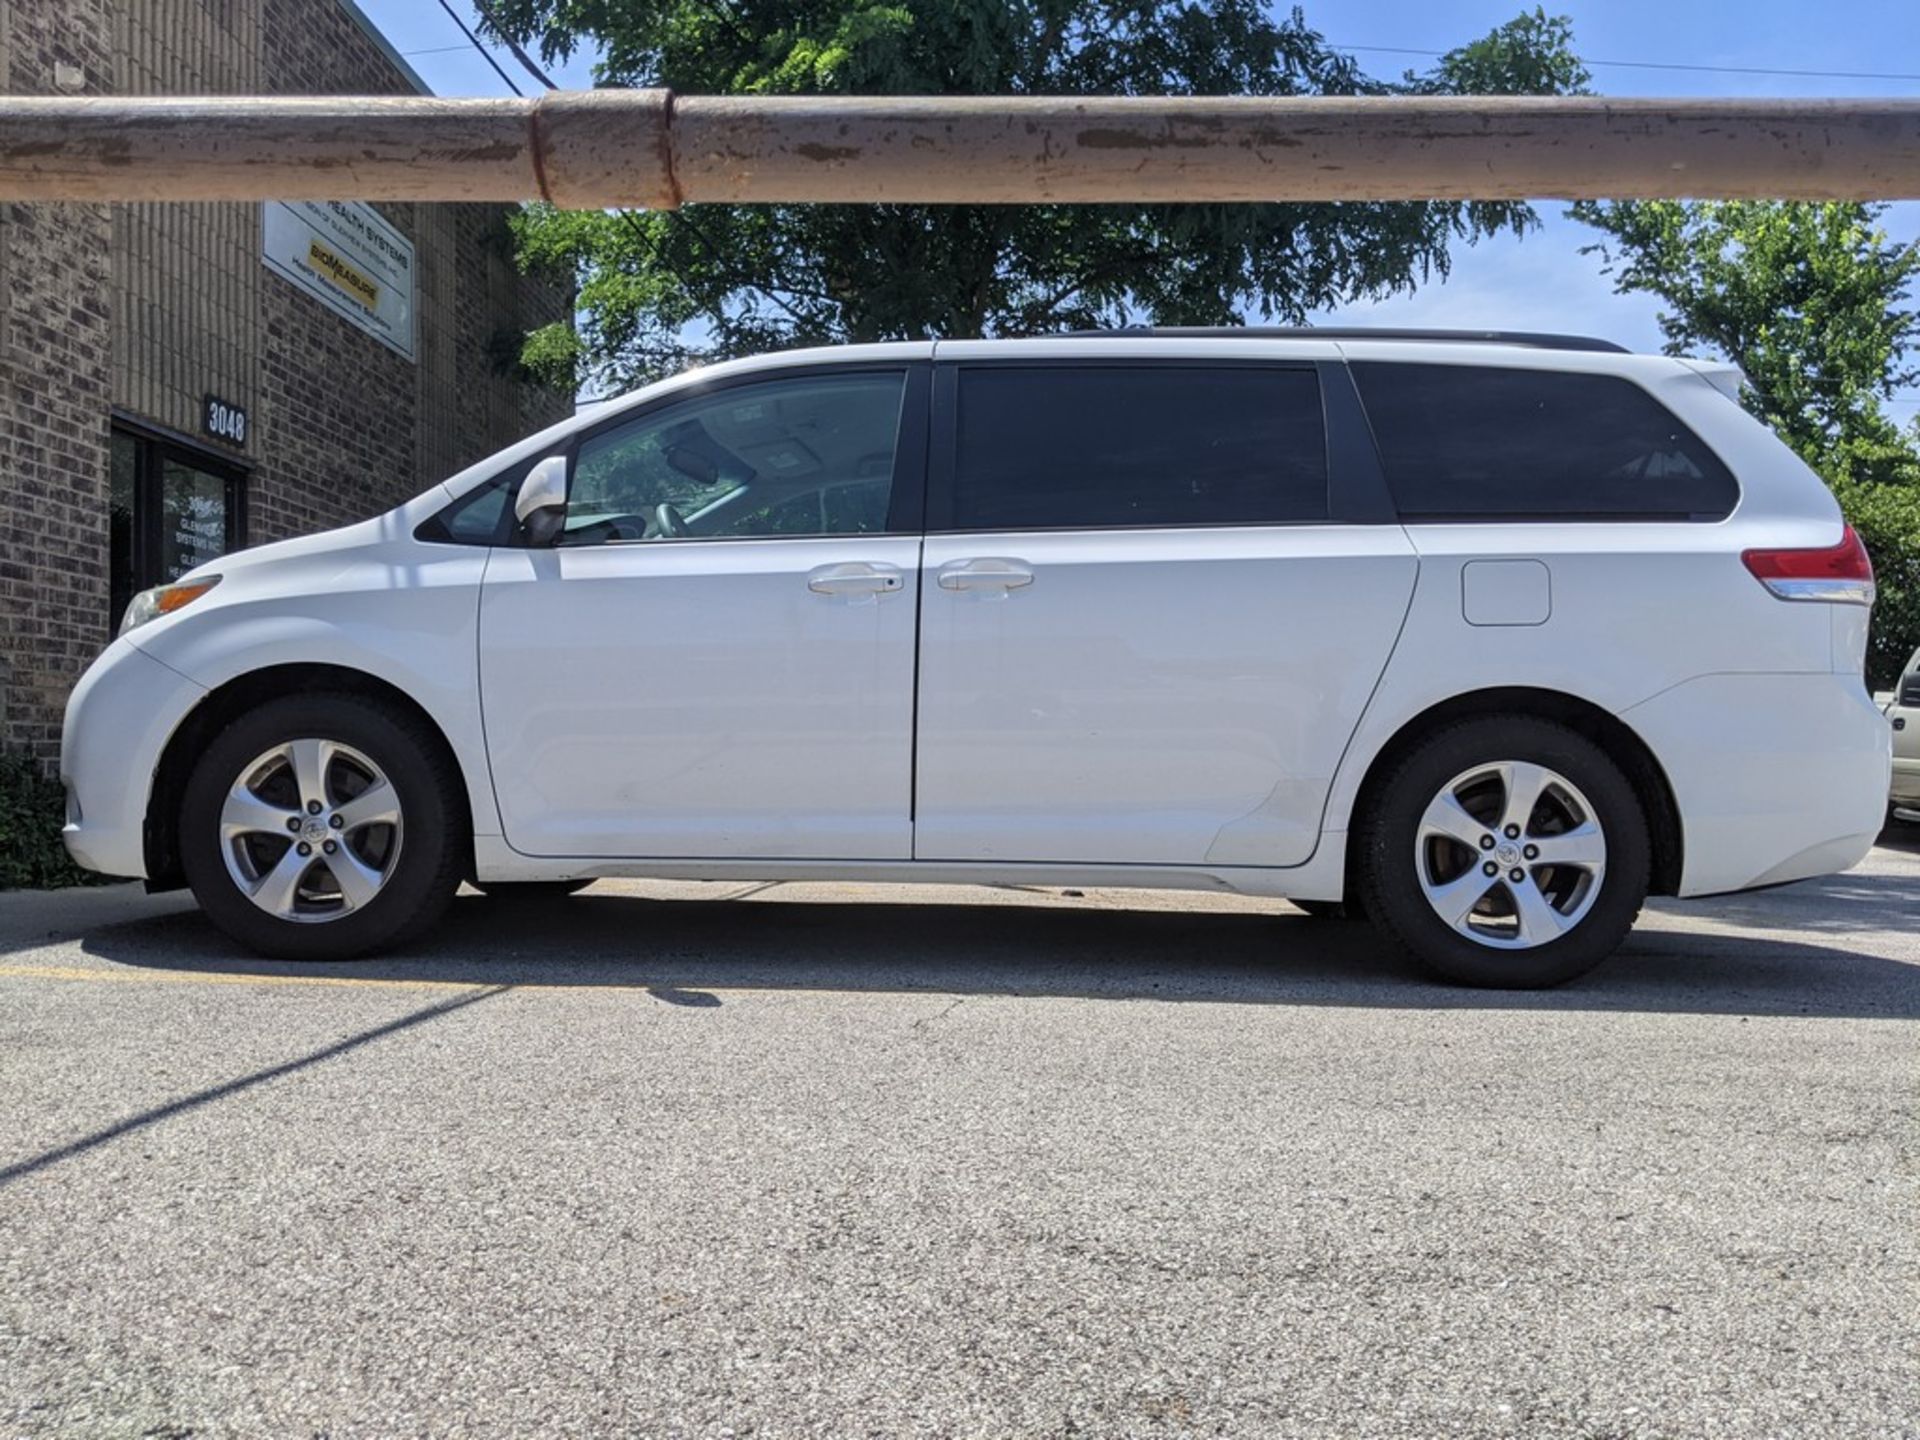 2014 TOYOTA MODEL SIENNA LE VAN, VIN: 5TDKK3DCXES482912, AUTOMATIC TRANSMISSION, APPROX. 240,000 - Image 2 of 14